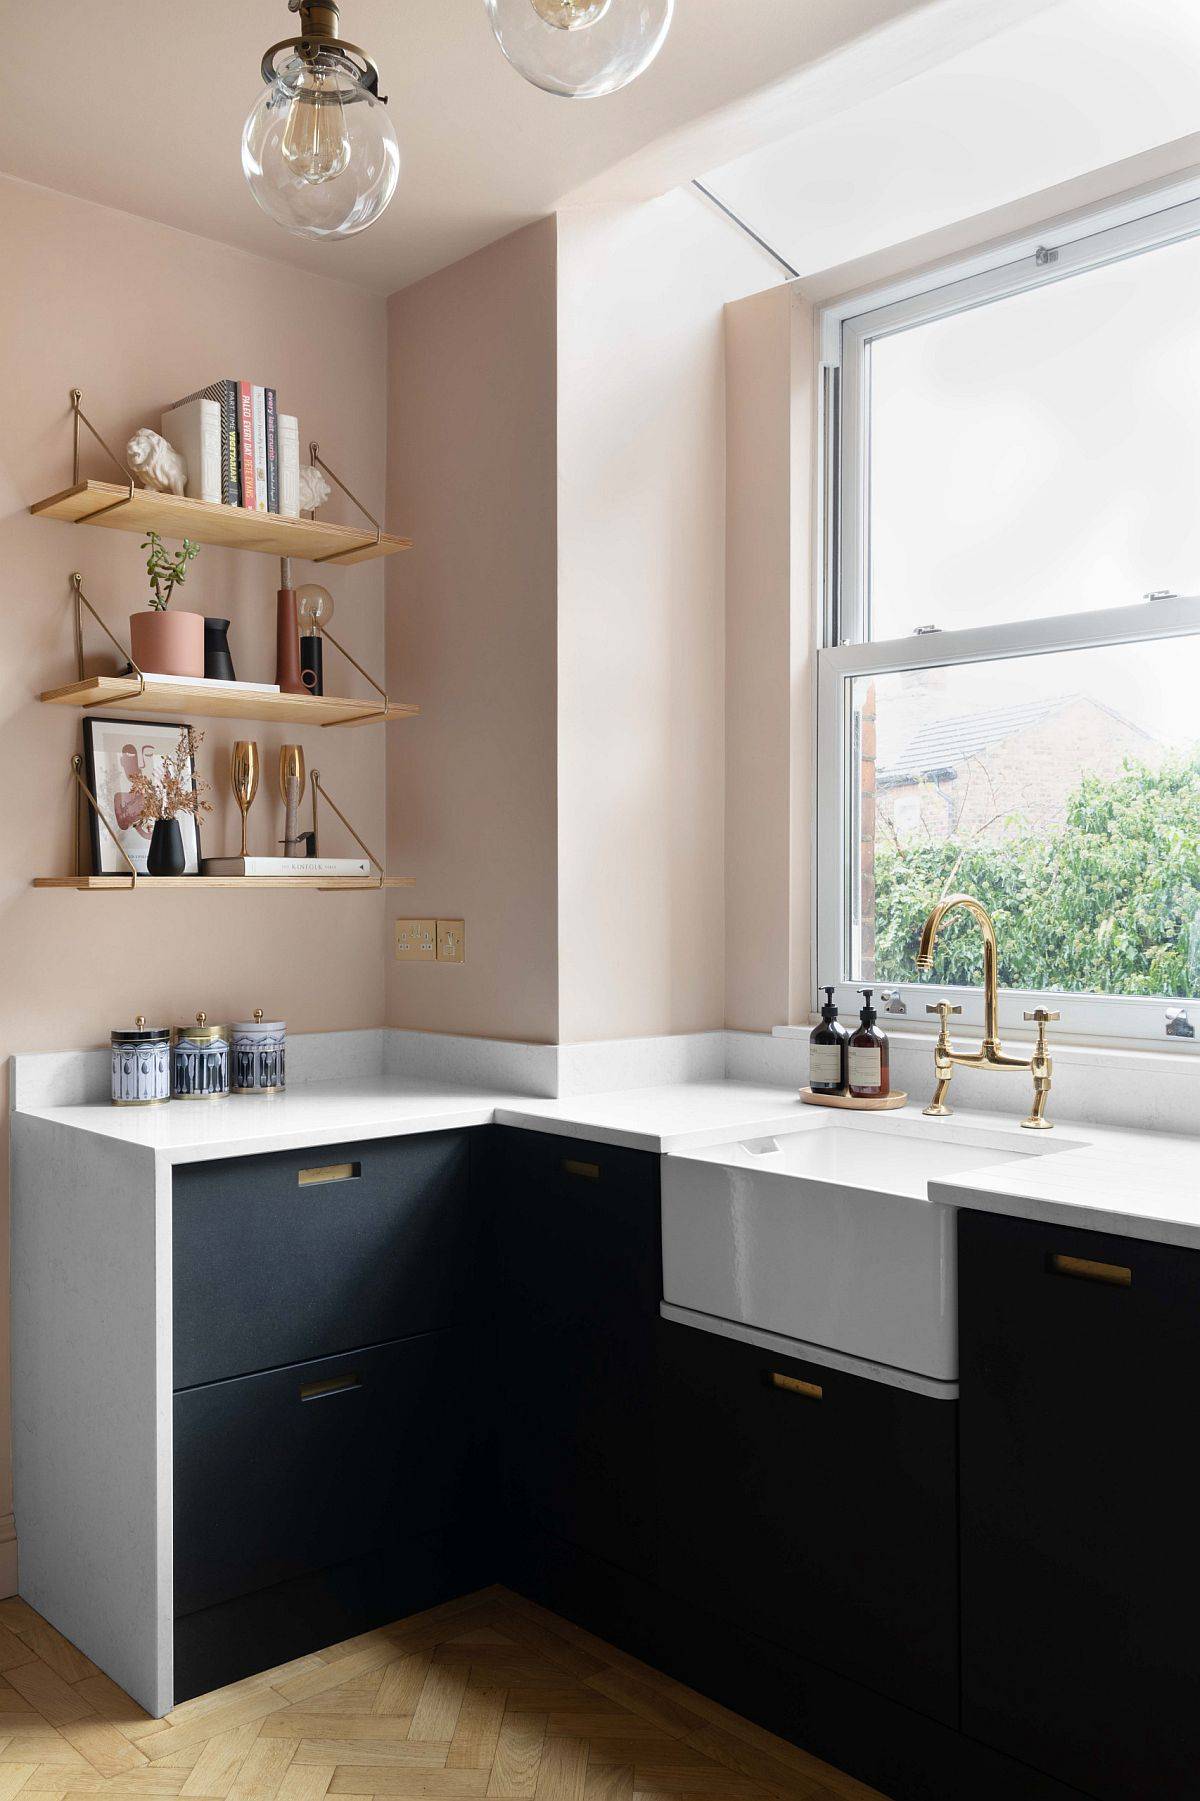 Gorgeous-sink-in-white-feels-like-an-extension-of-the-kitchen-counters-24879